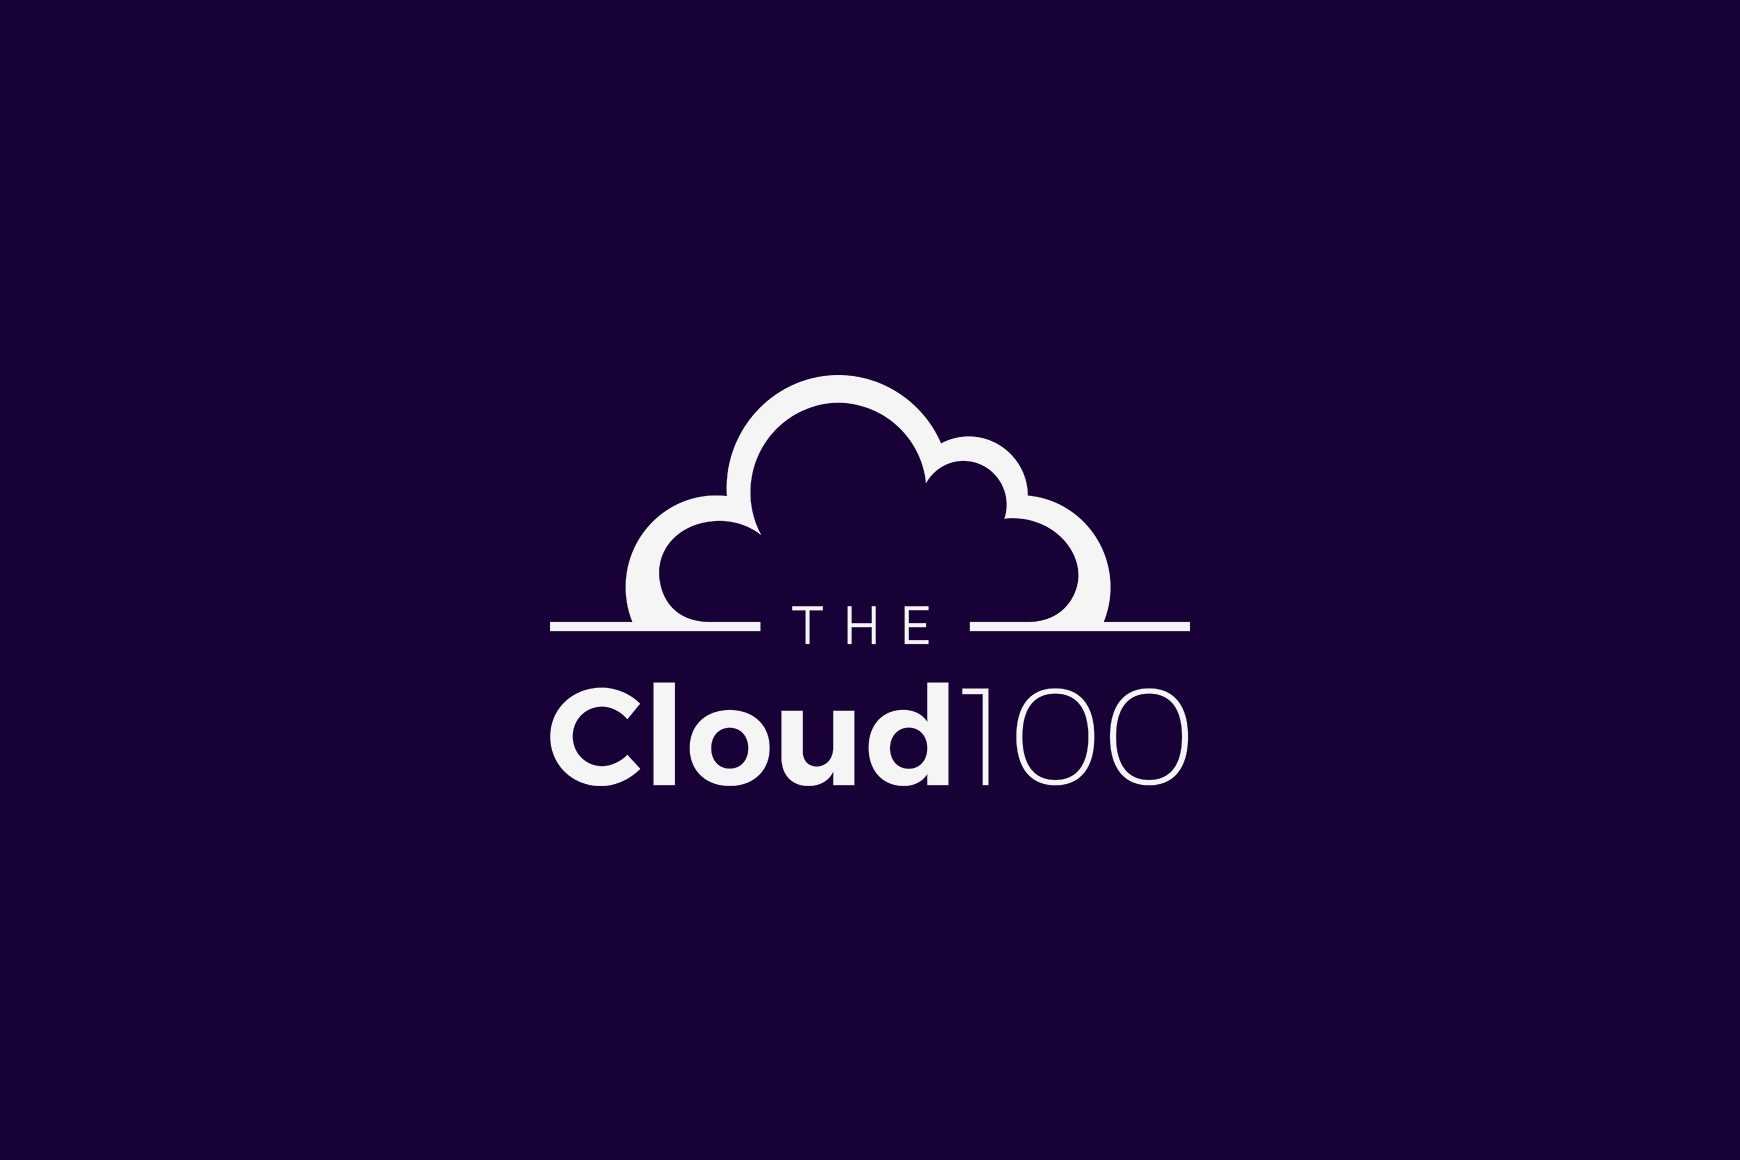 Talkdesk named to 2019 Forbes Cloud 100